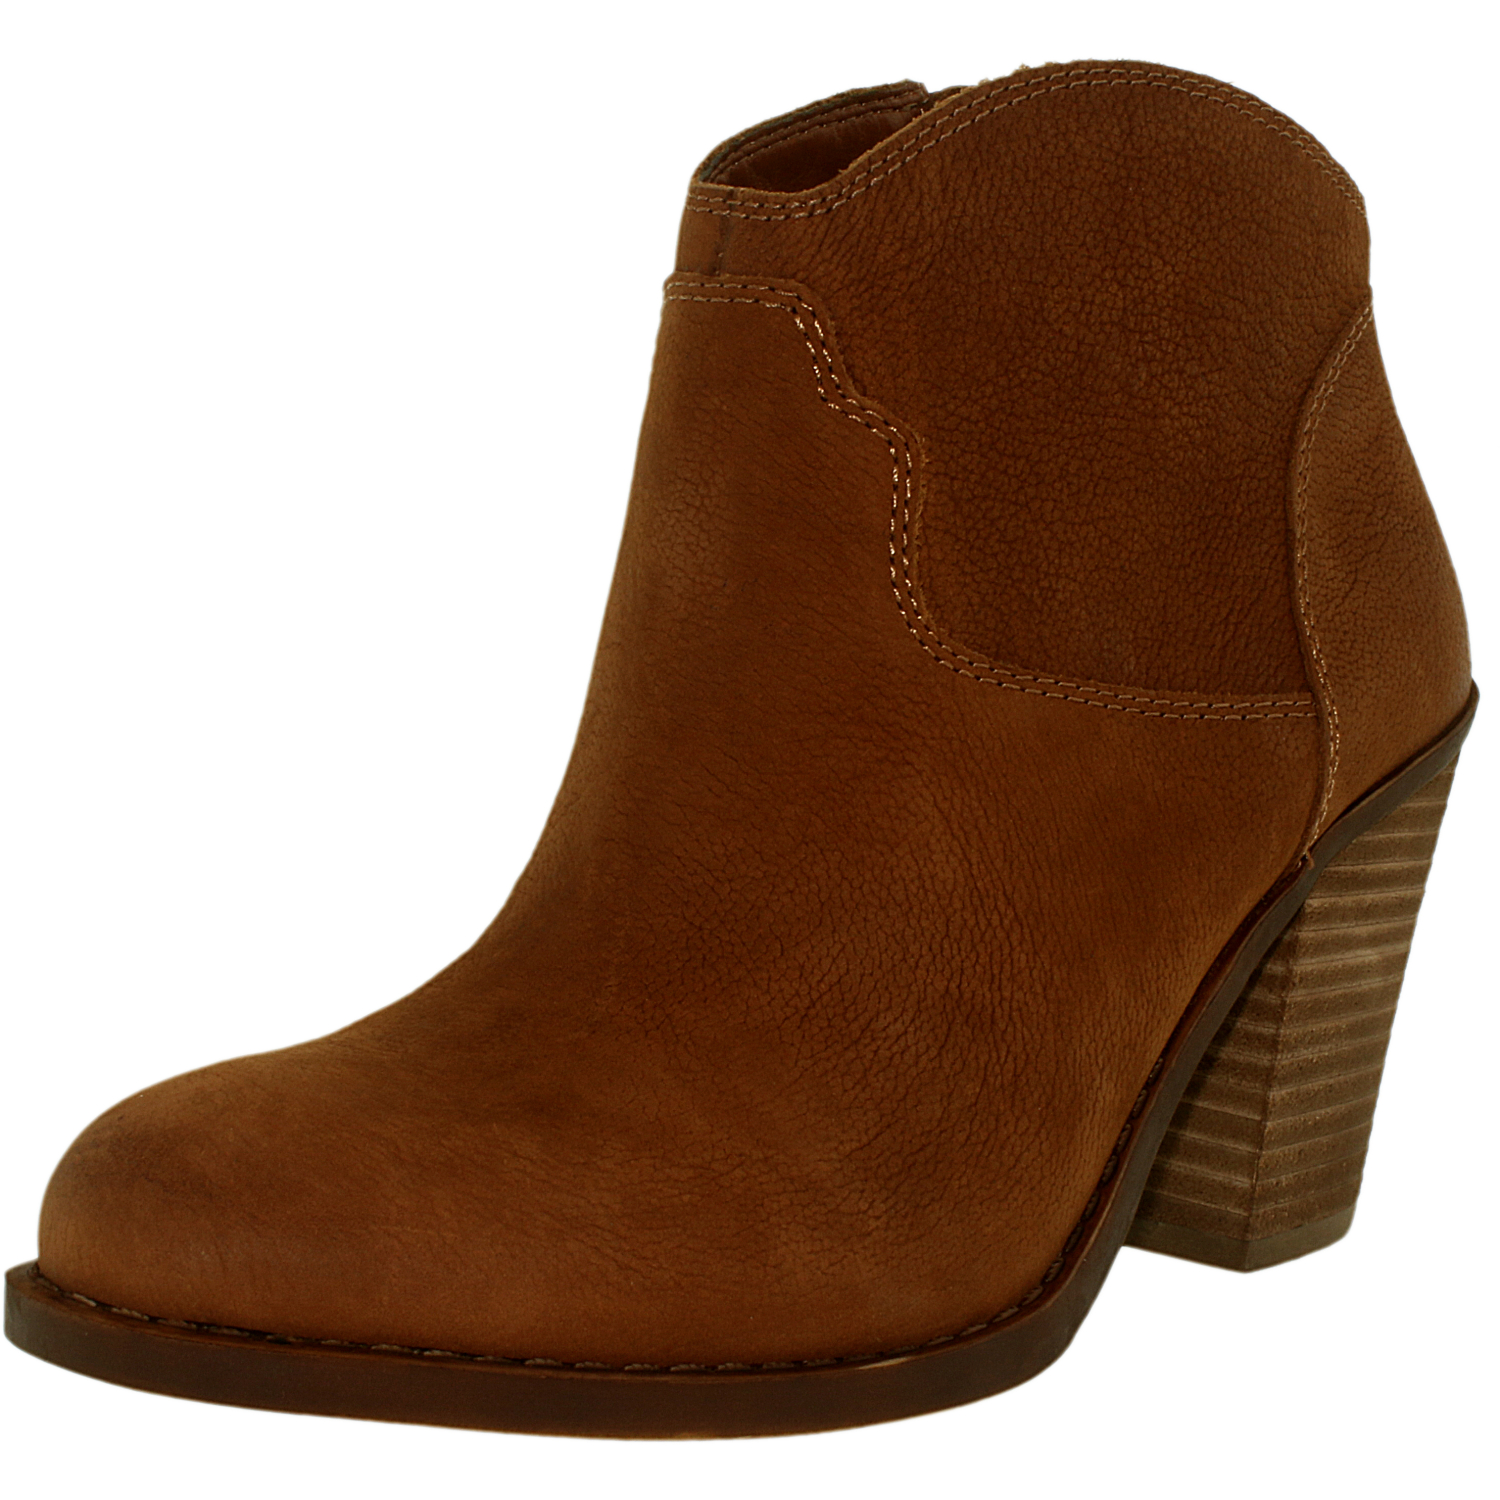 Lucky Women's Eller Suede Leather Ankle-High Boot